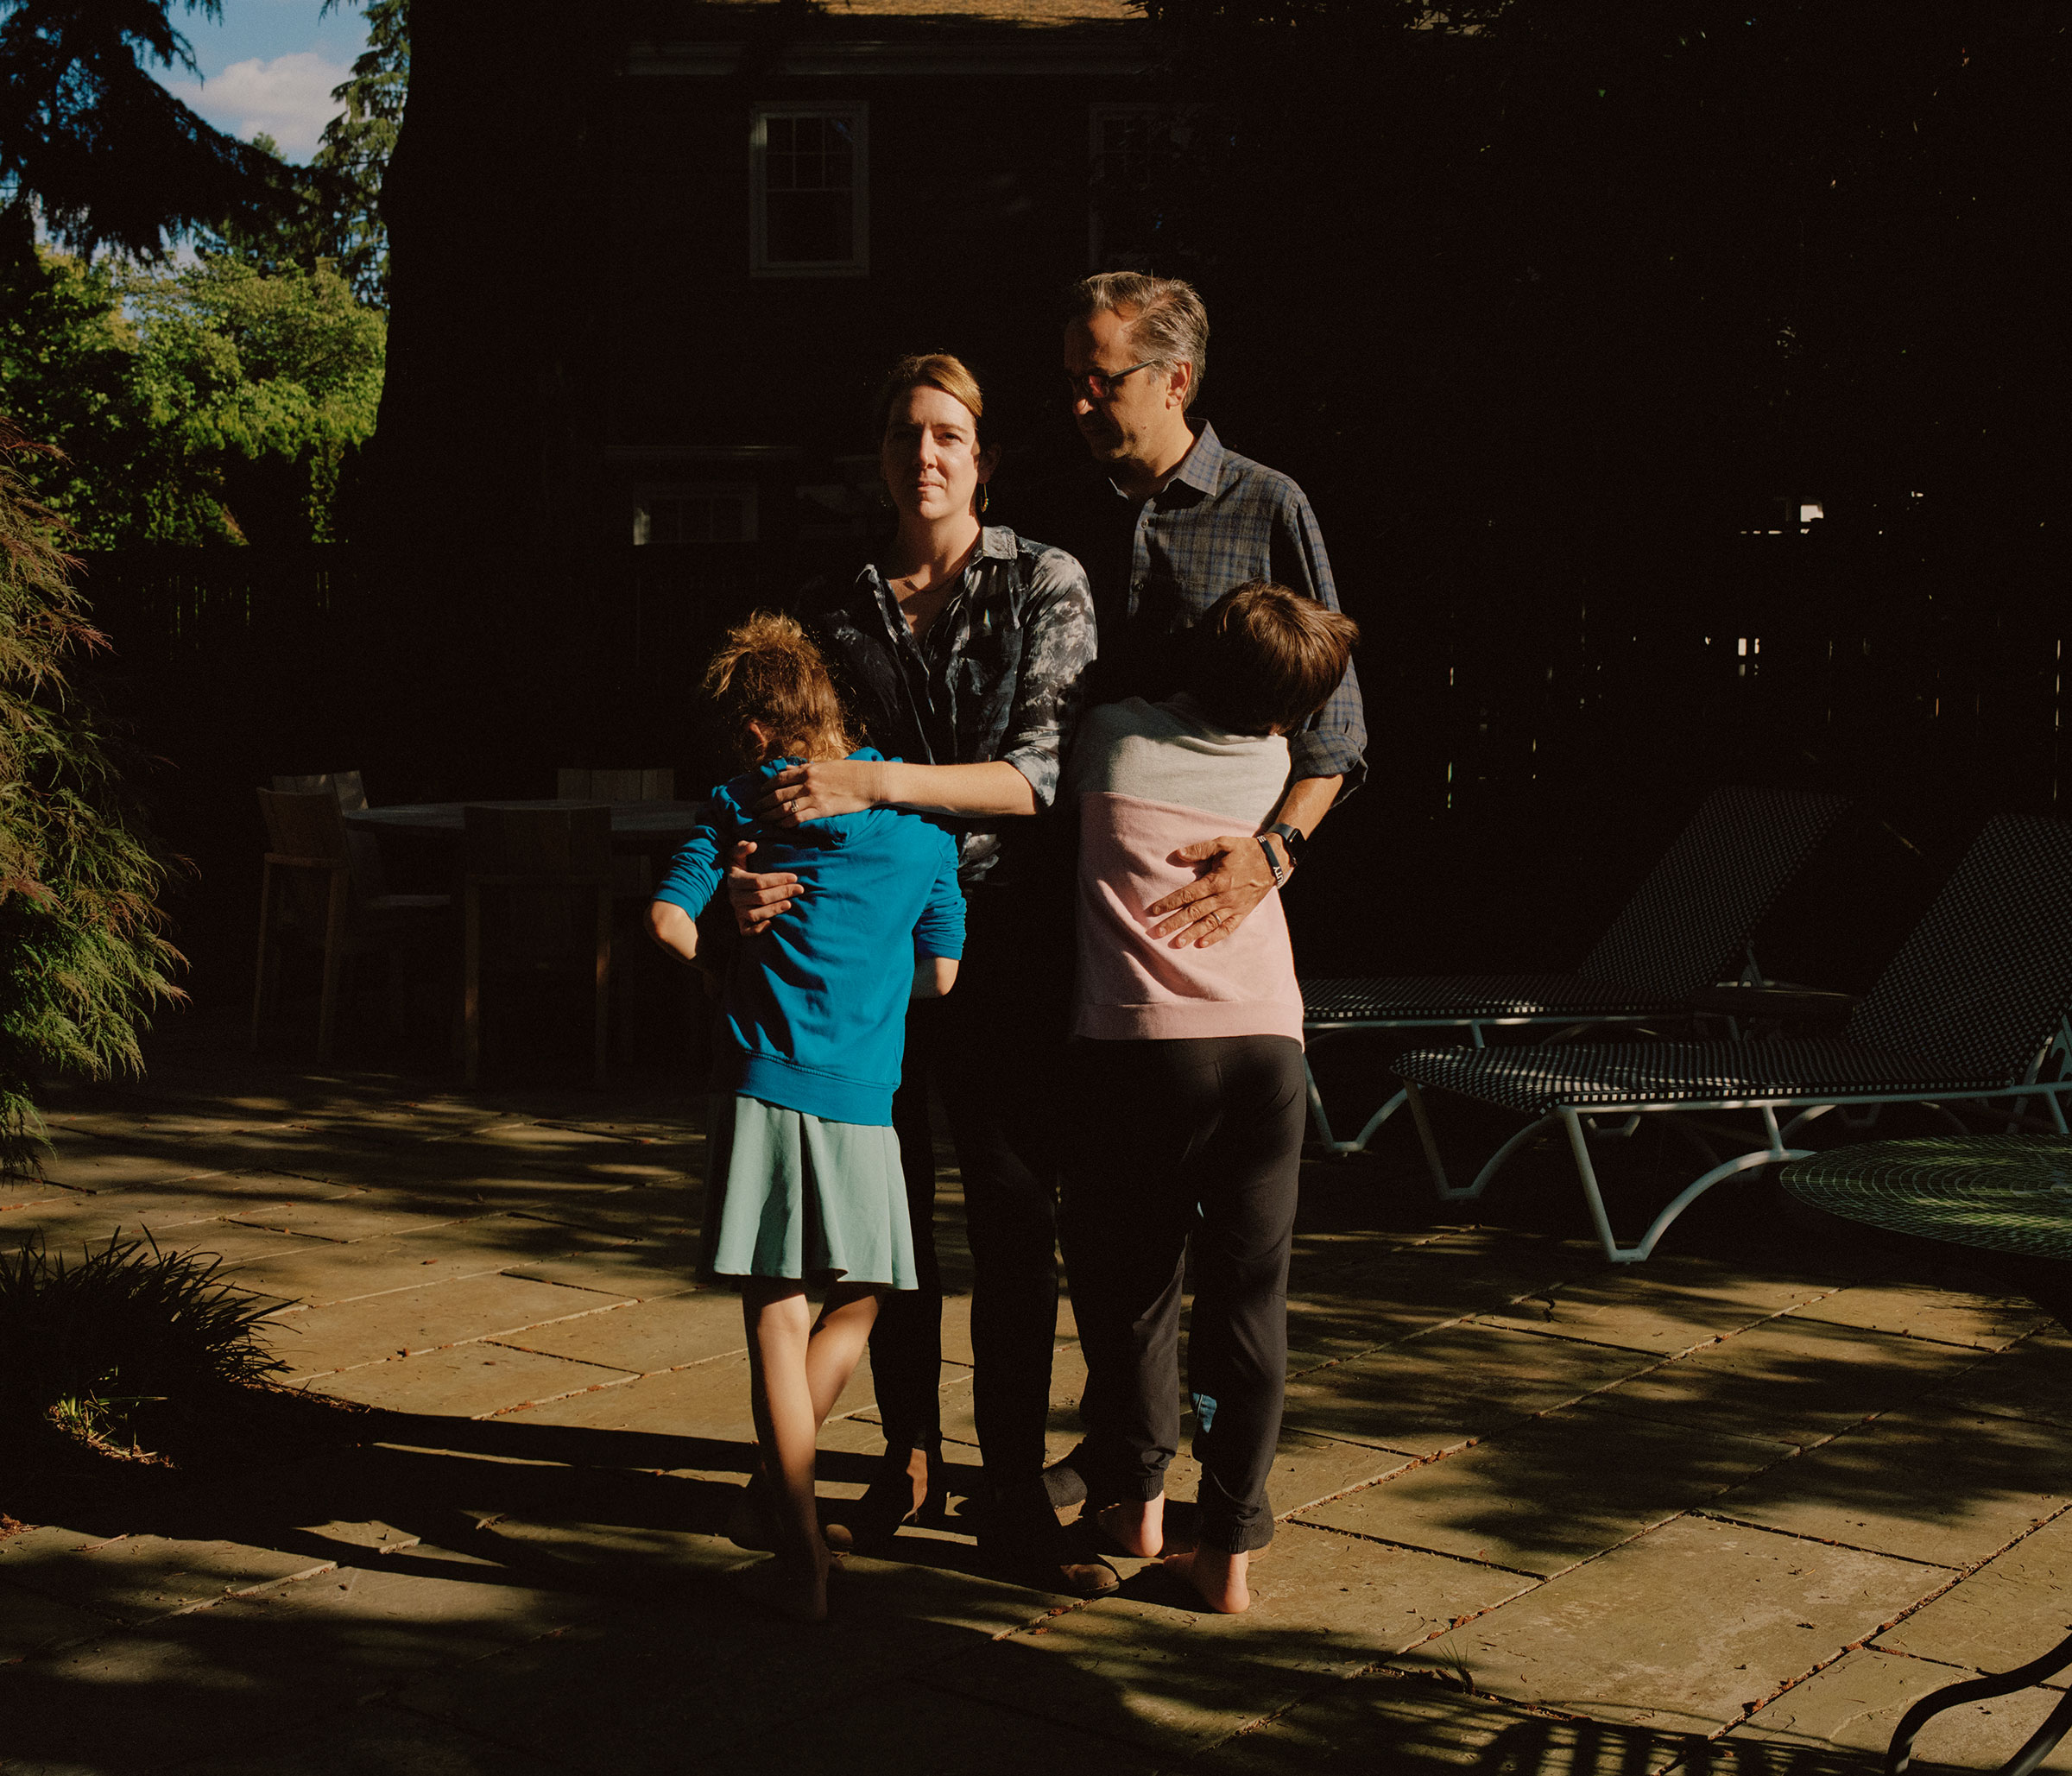 Karen and Chris with their kids at their new home in Portland, Ore. after leaving their home in Austin, Texas because of anti-trans state action. (Ricardo Nagaoka for TIME)